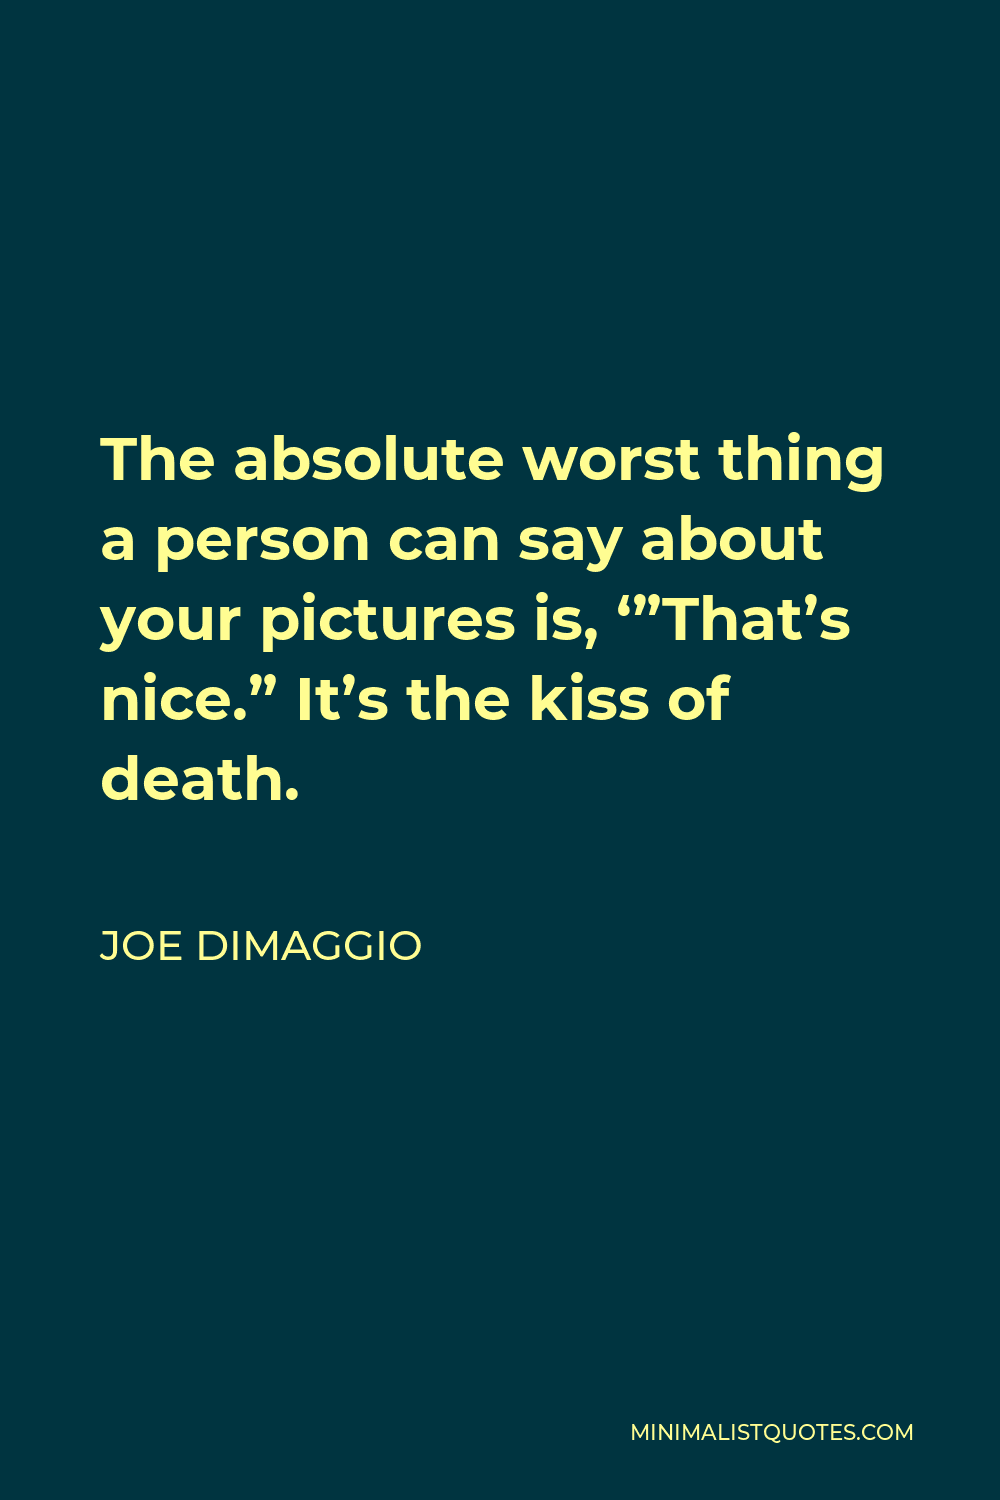 Joe DiMaggio Quote - The absolute worst thing a person can say about your pictures is, ‘”That’s nice.” It’s the kiss of death.